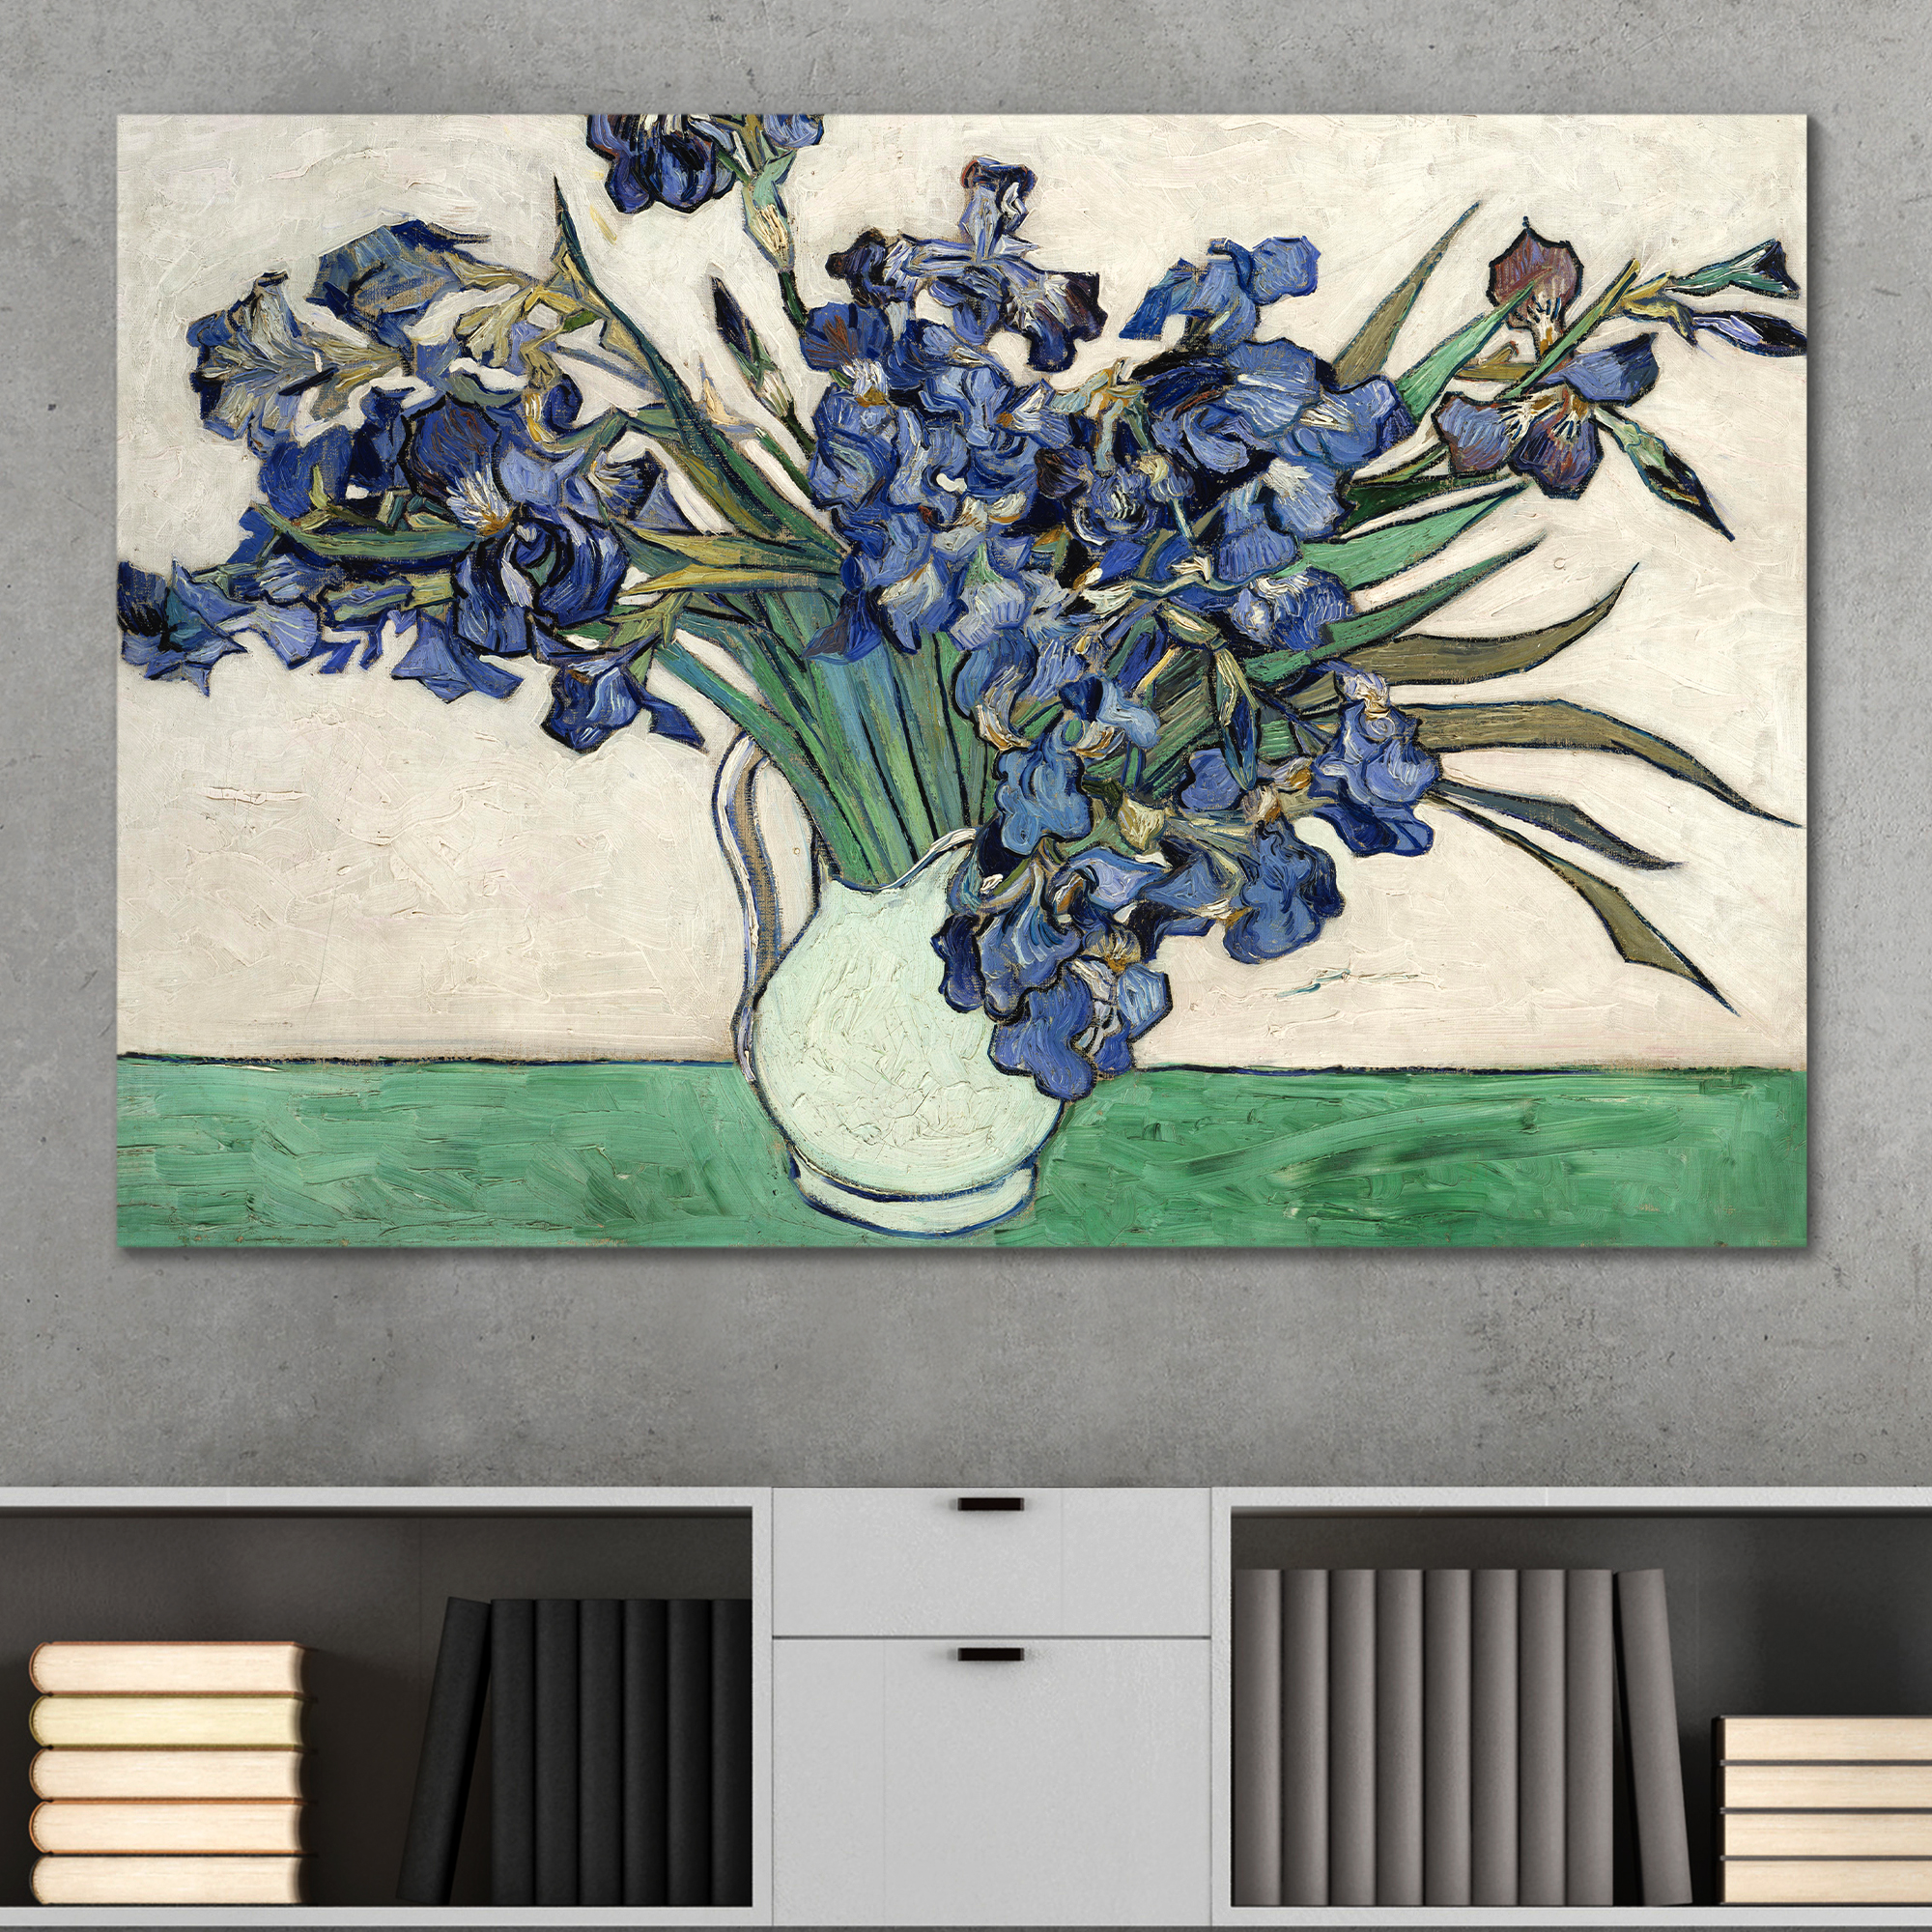 Irises in a Vase by Vincent Van Gogh - Oil Painting Reproduction on Canvas Prints Wall Art, Ready to Hang - 24